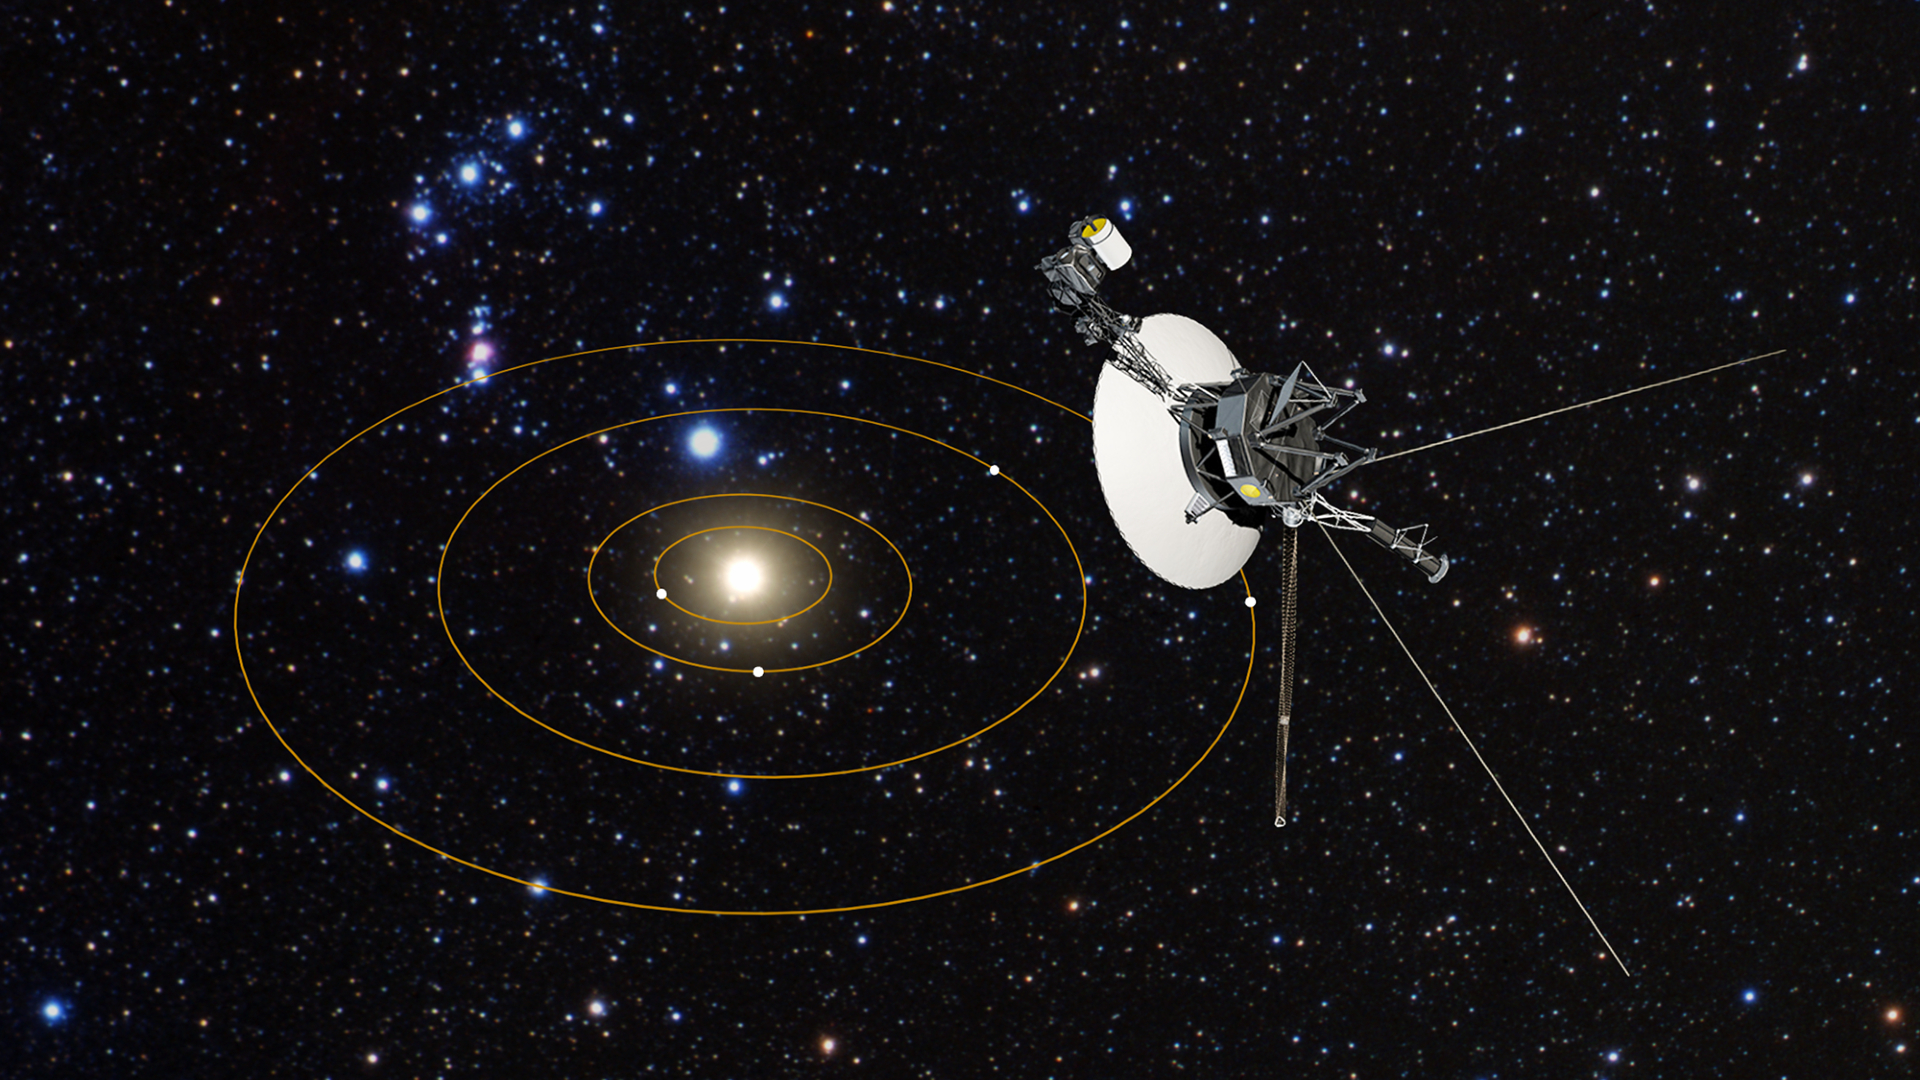 NASA’s Voyager 1 probe in interstellar space can’t phone home (again) due to glitch